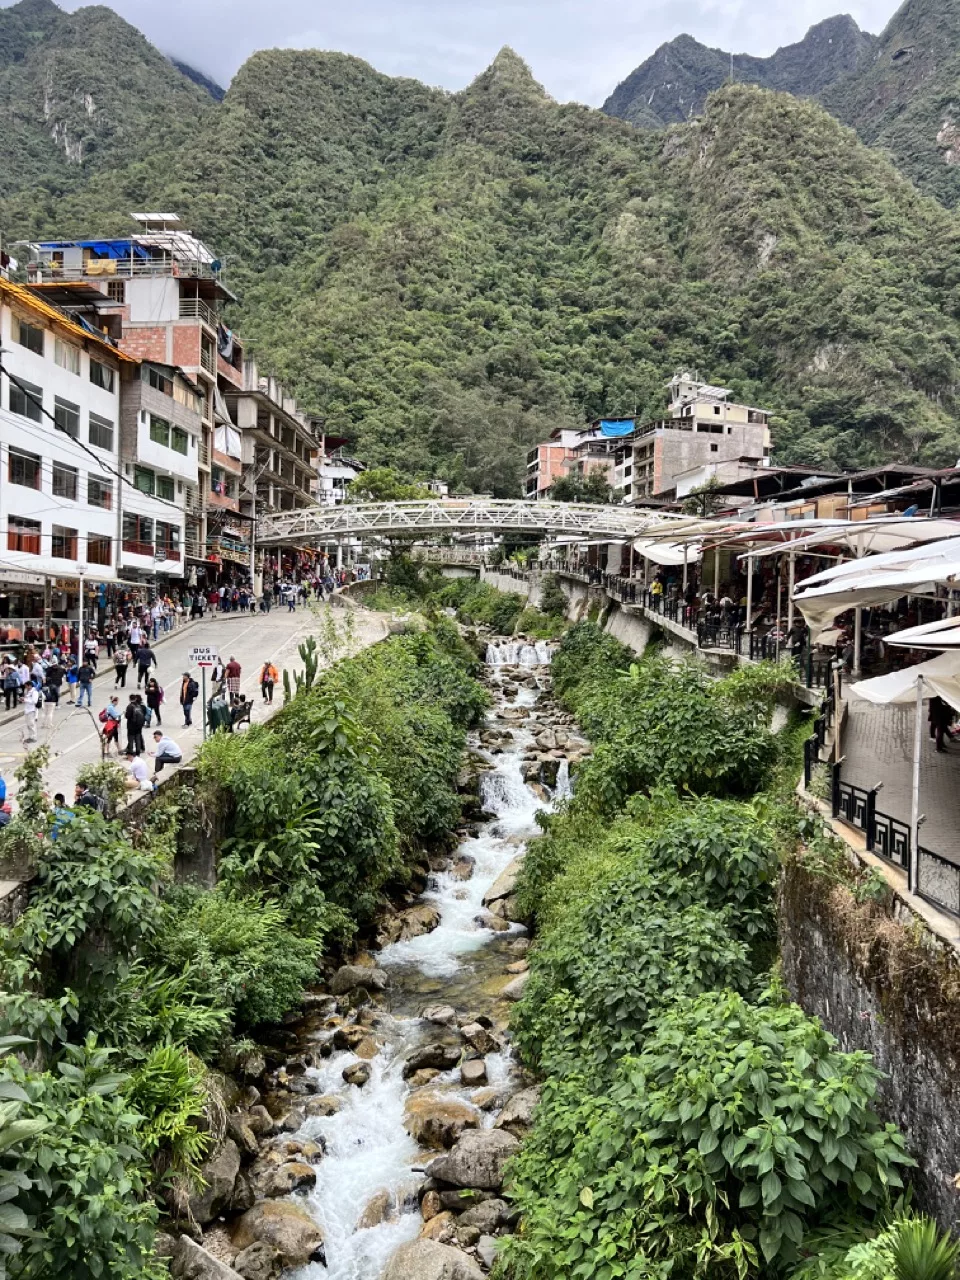 The town of Aguas Calientes.